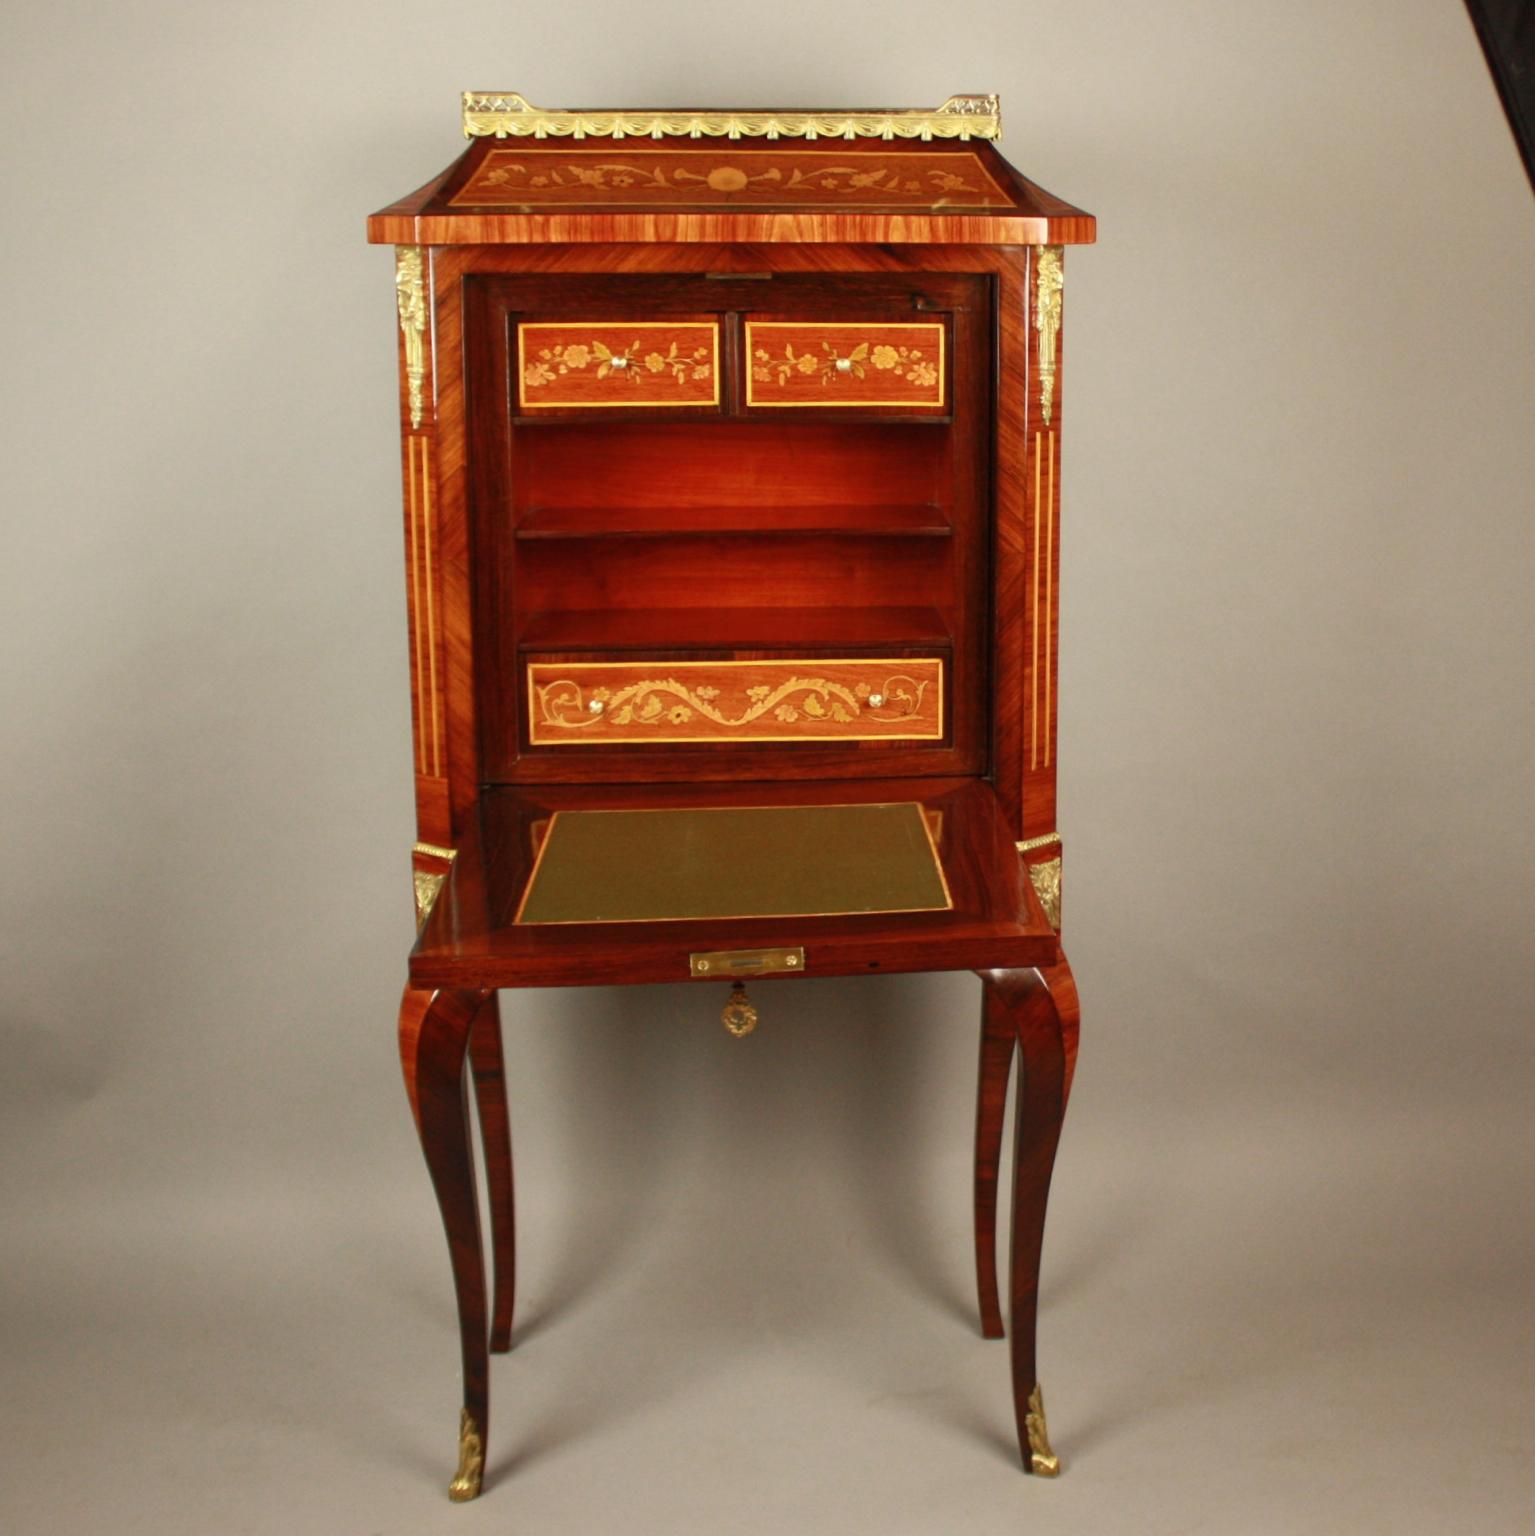 Napoleon III 19th Century Louis XVI Floral Marquetry Writing Cabinet or Lady's Secrétaire For Sale